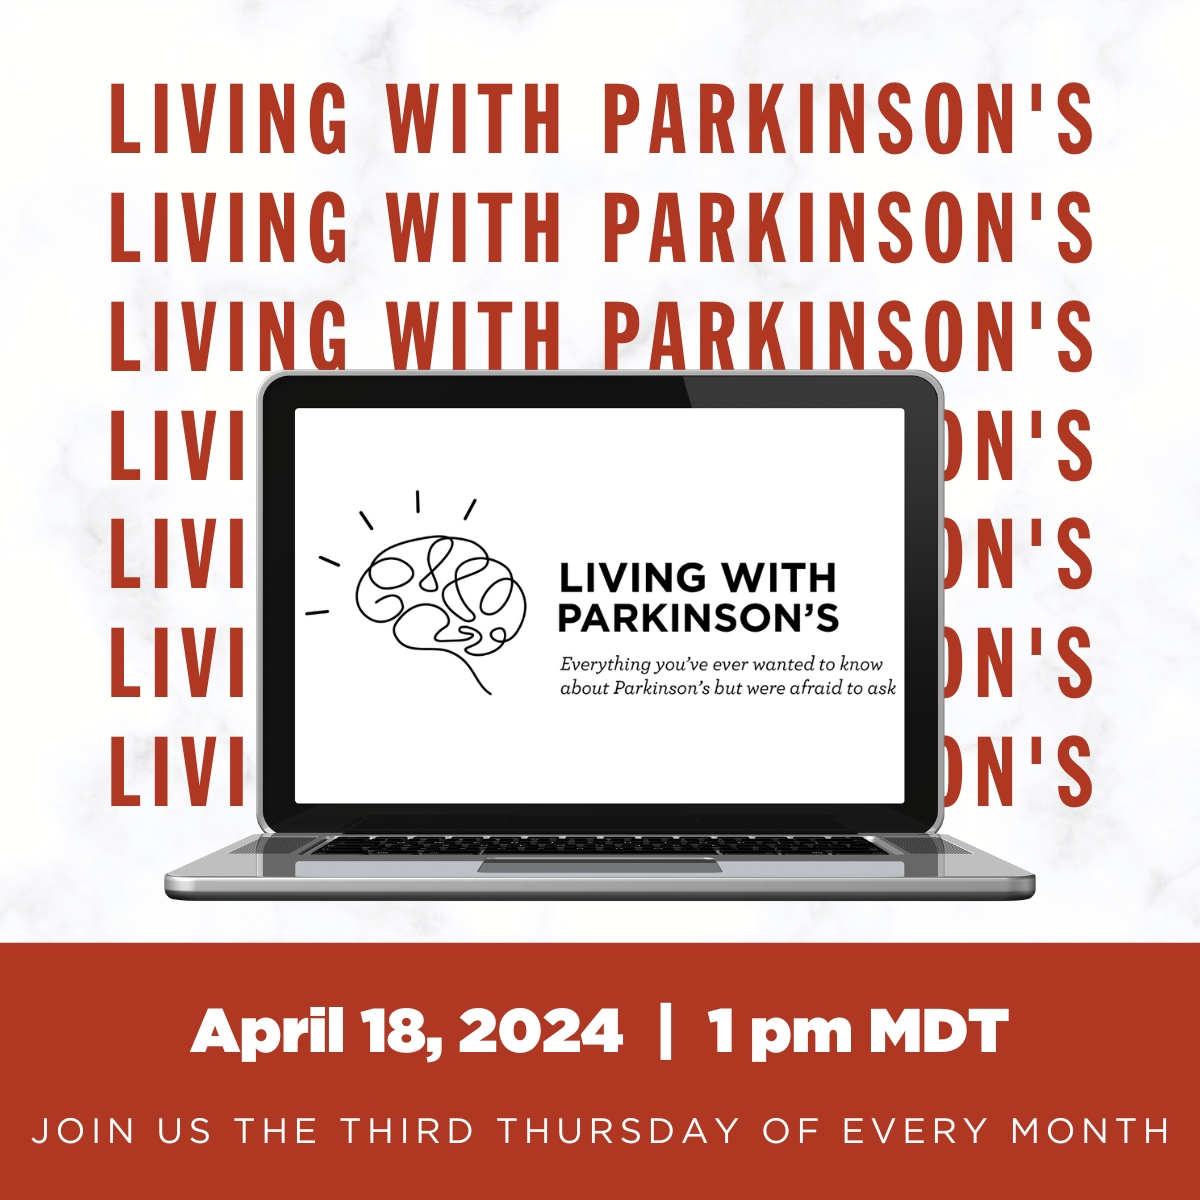 Our monthly Living with Parkinson’s #Meetup brings together all people diagnosed with #Parkinsons for open, honest, real, and always fun #conversations about everything you’ve ever wanted to know but were afraid to ask. Register for the #webinar series: bit.ly/3aFTnkK